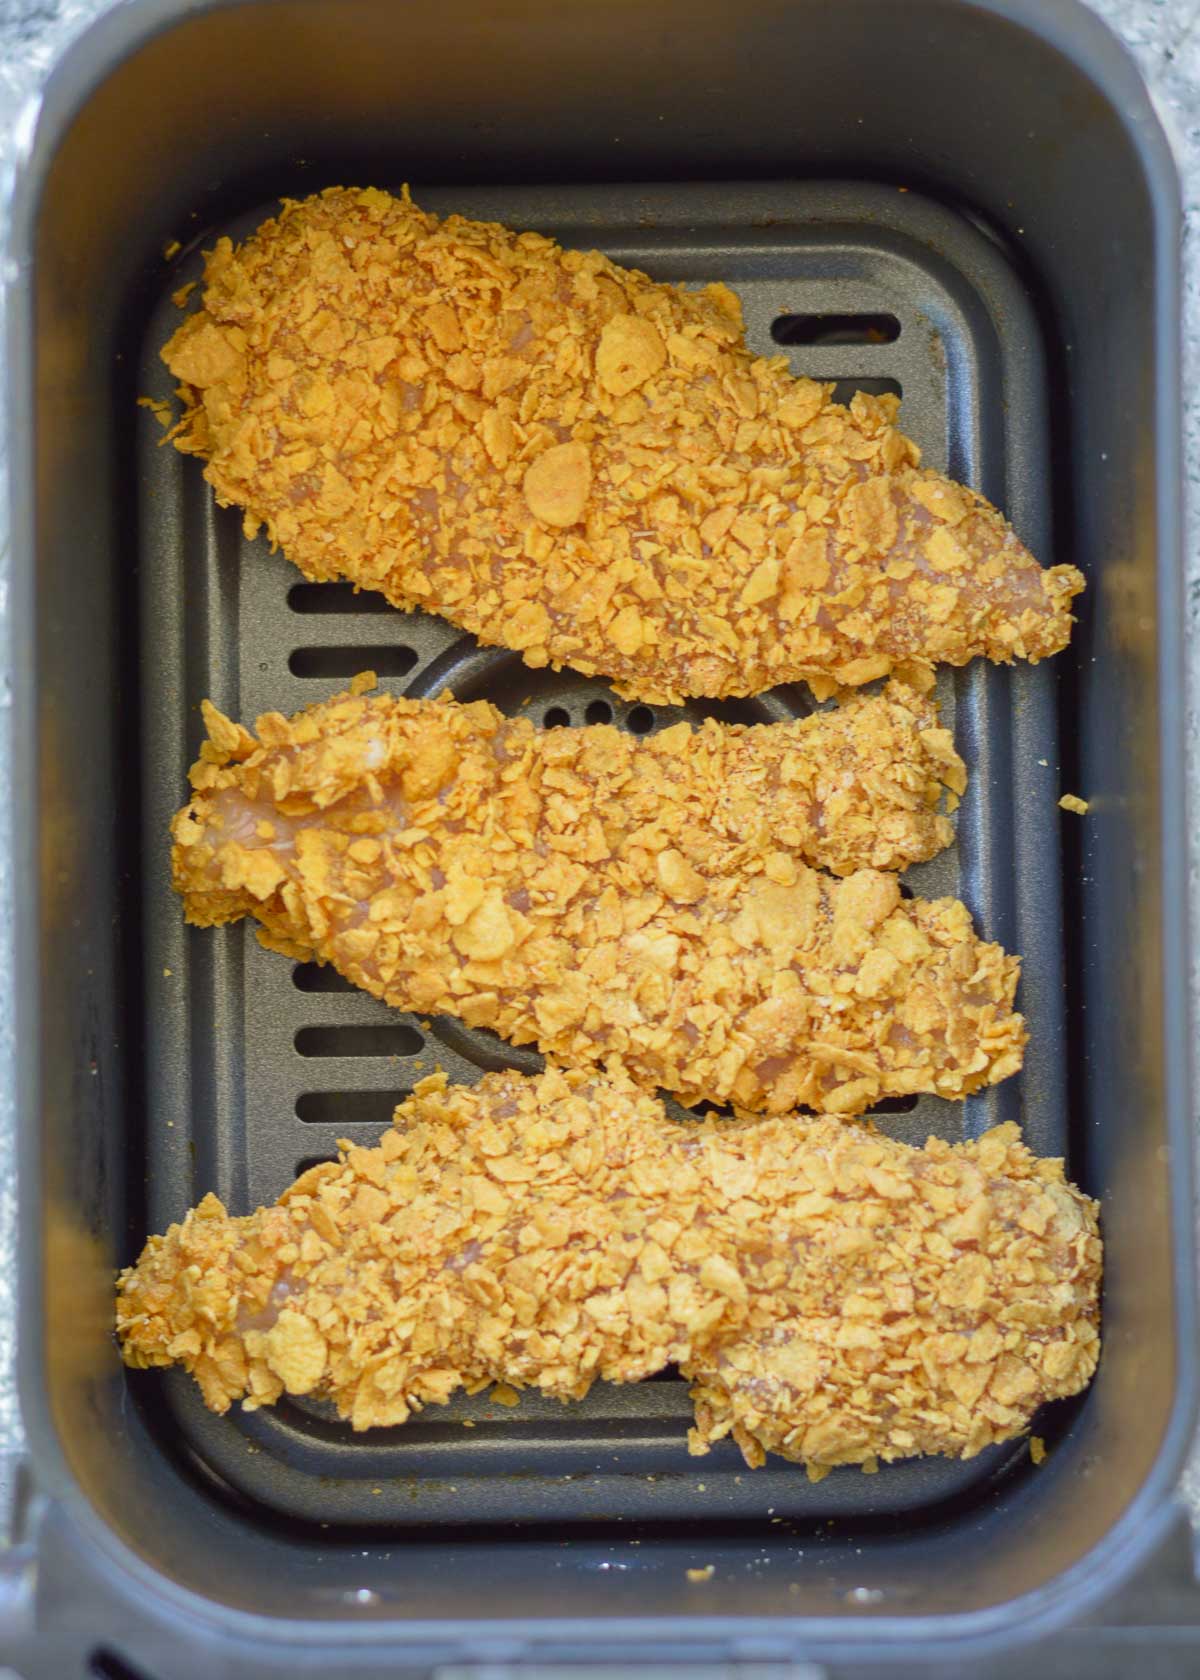 These Crispy Air Fryer Chicken Tenders are ready with less than 10 minutes in the air fryer! Parmesan, cornflakes, and a tasty Italian seasoning give these juicy chicken strips loads of flavor.